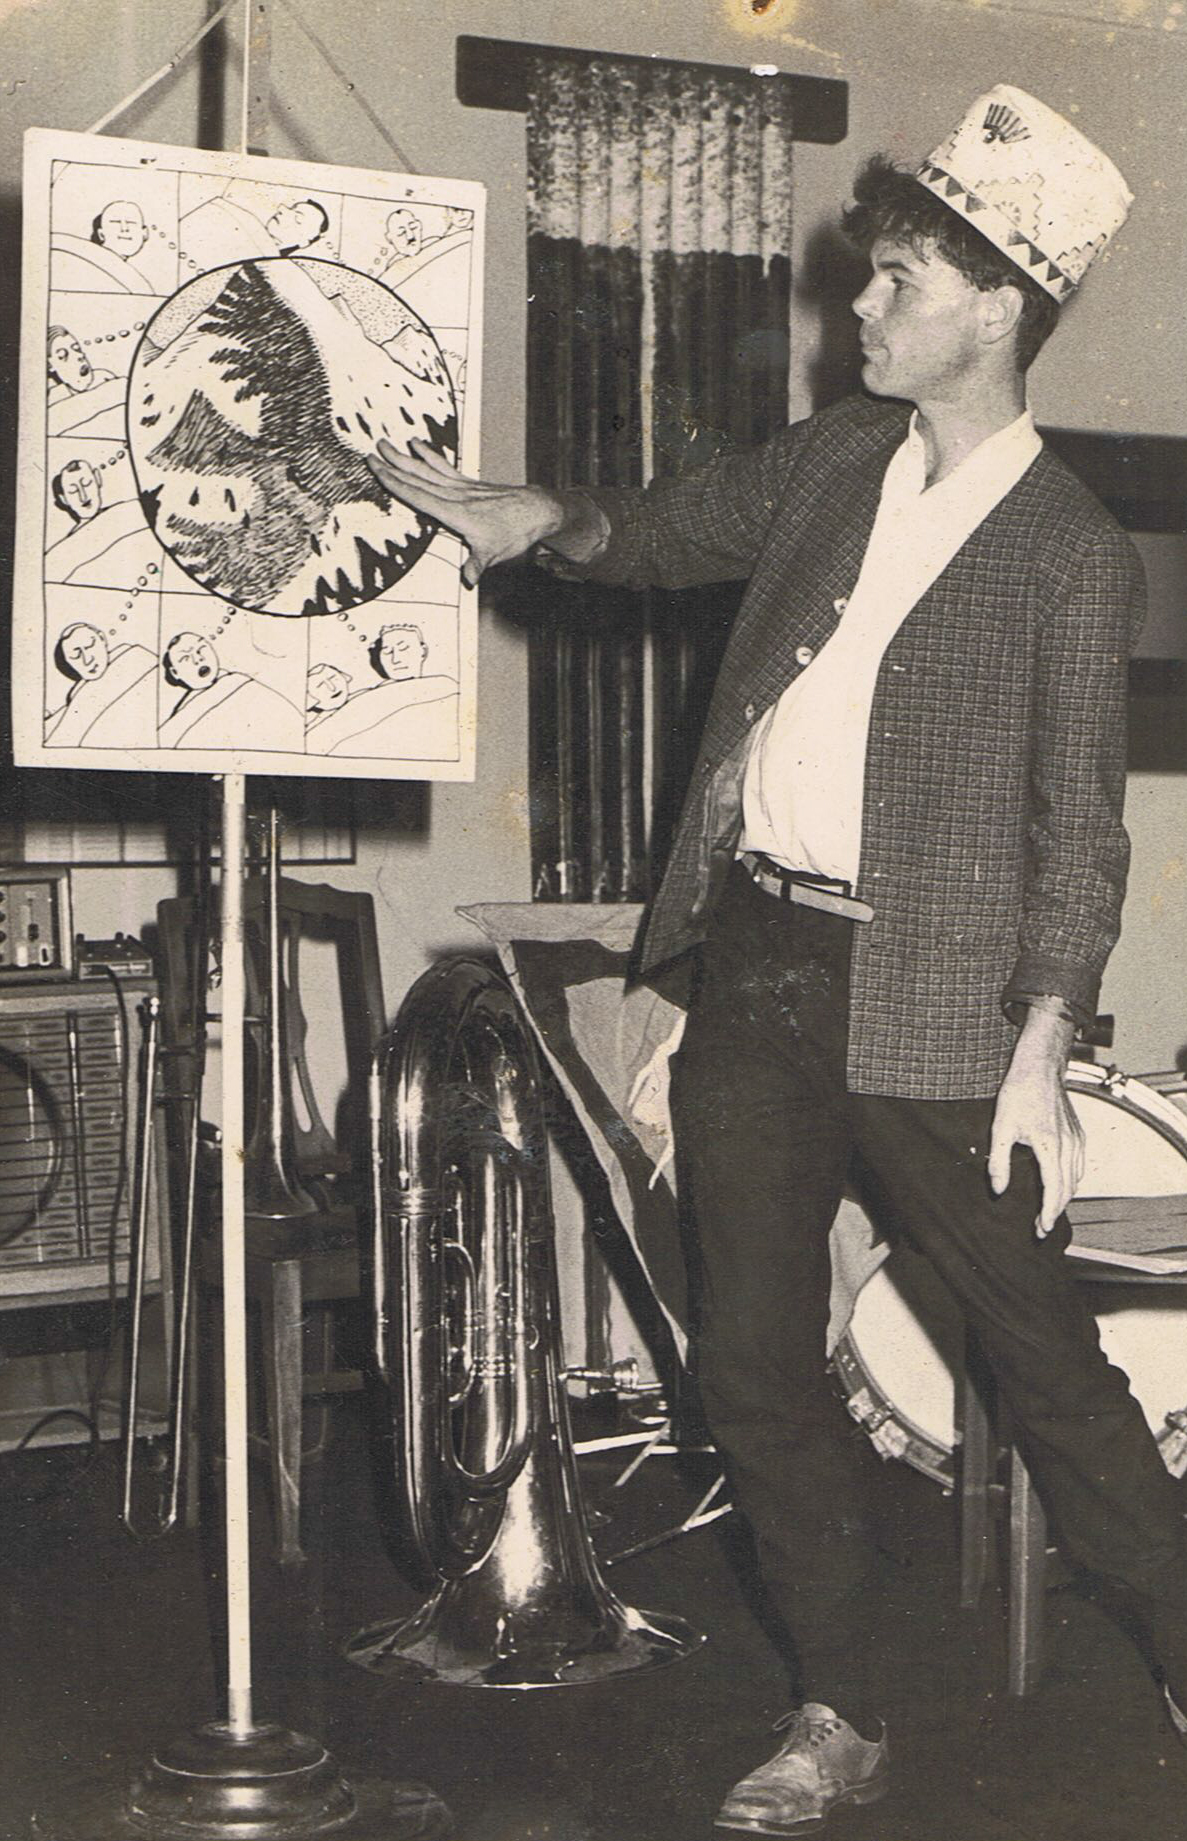 A photo of Gerard telling a story in front an easel with his drawings